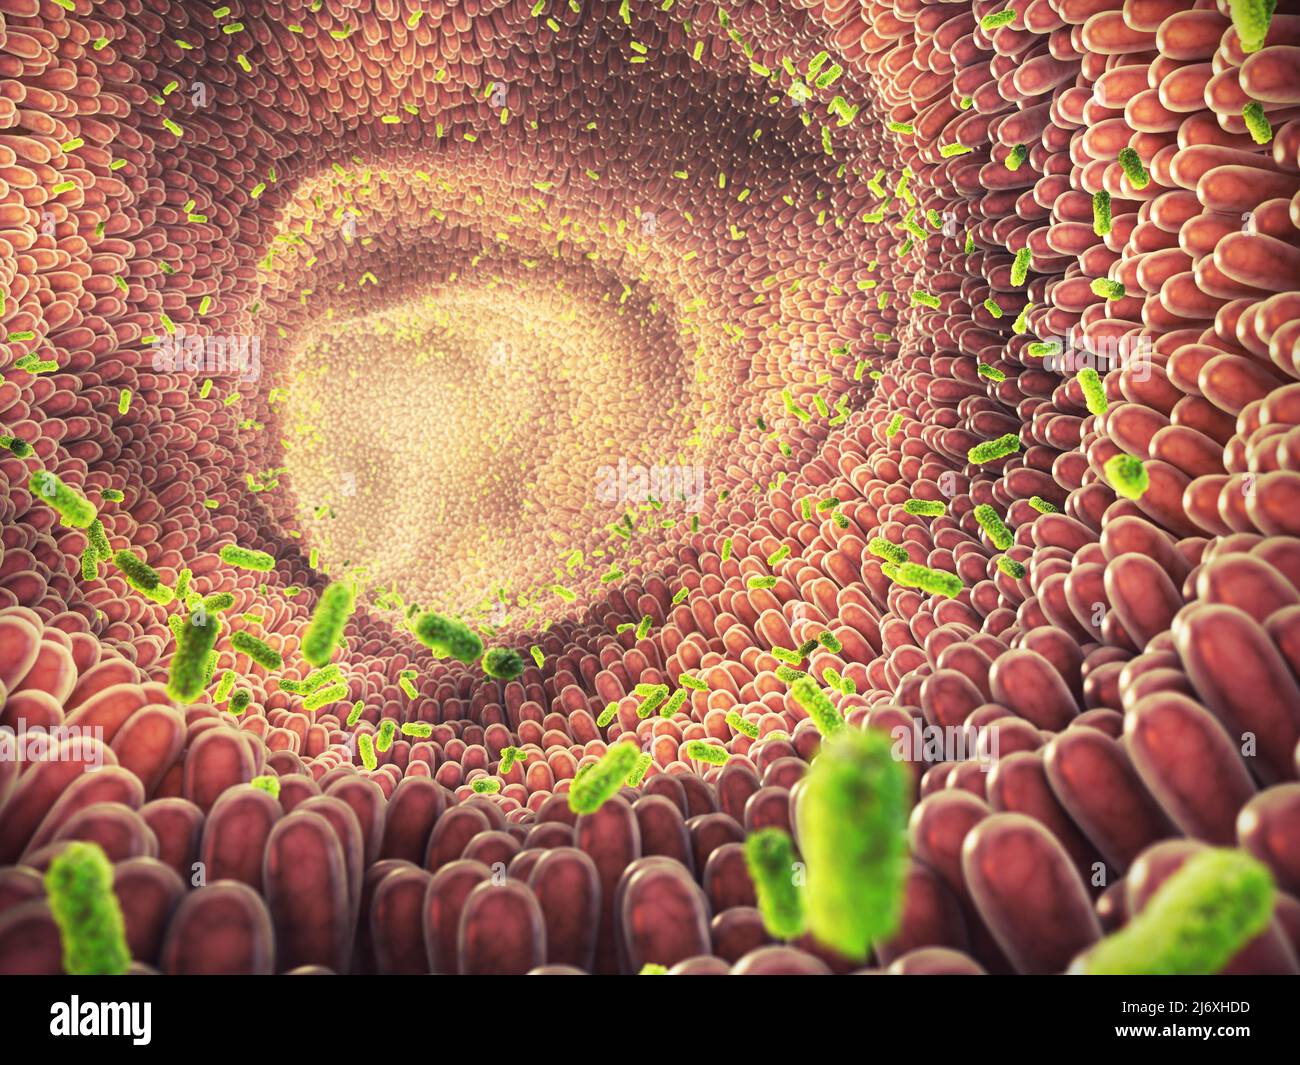 Intestinal bacteria illustration. Gut microbiome helps control intestinal digestion and the immune system. Probiotics are beneficial bacteria Stock Photo